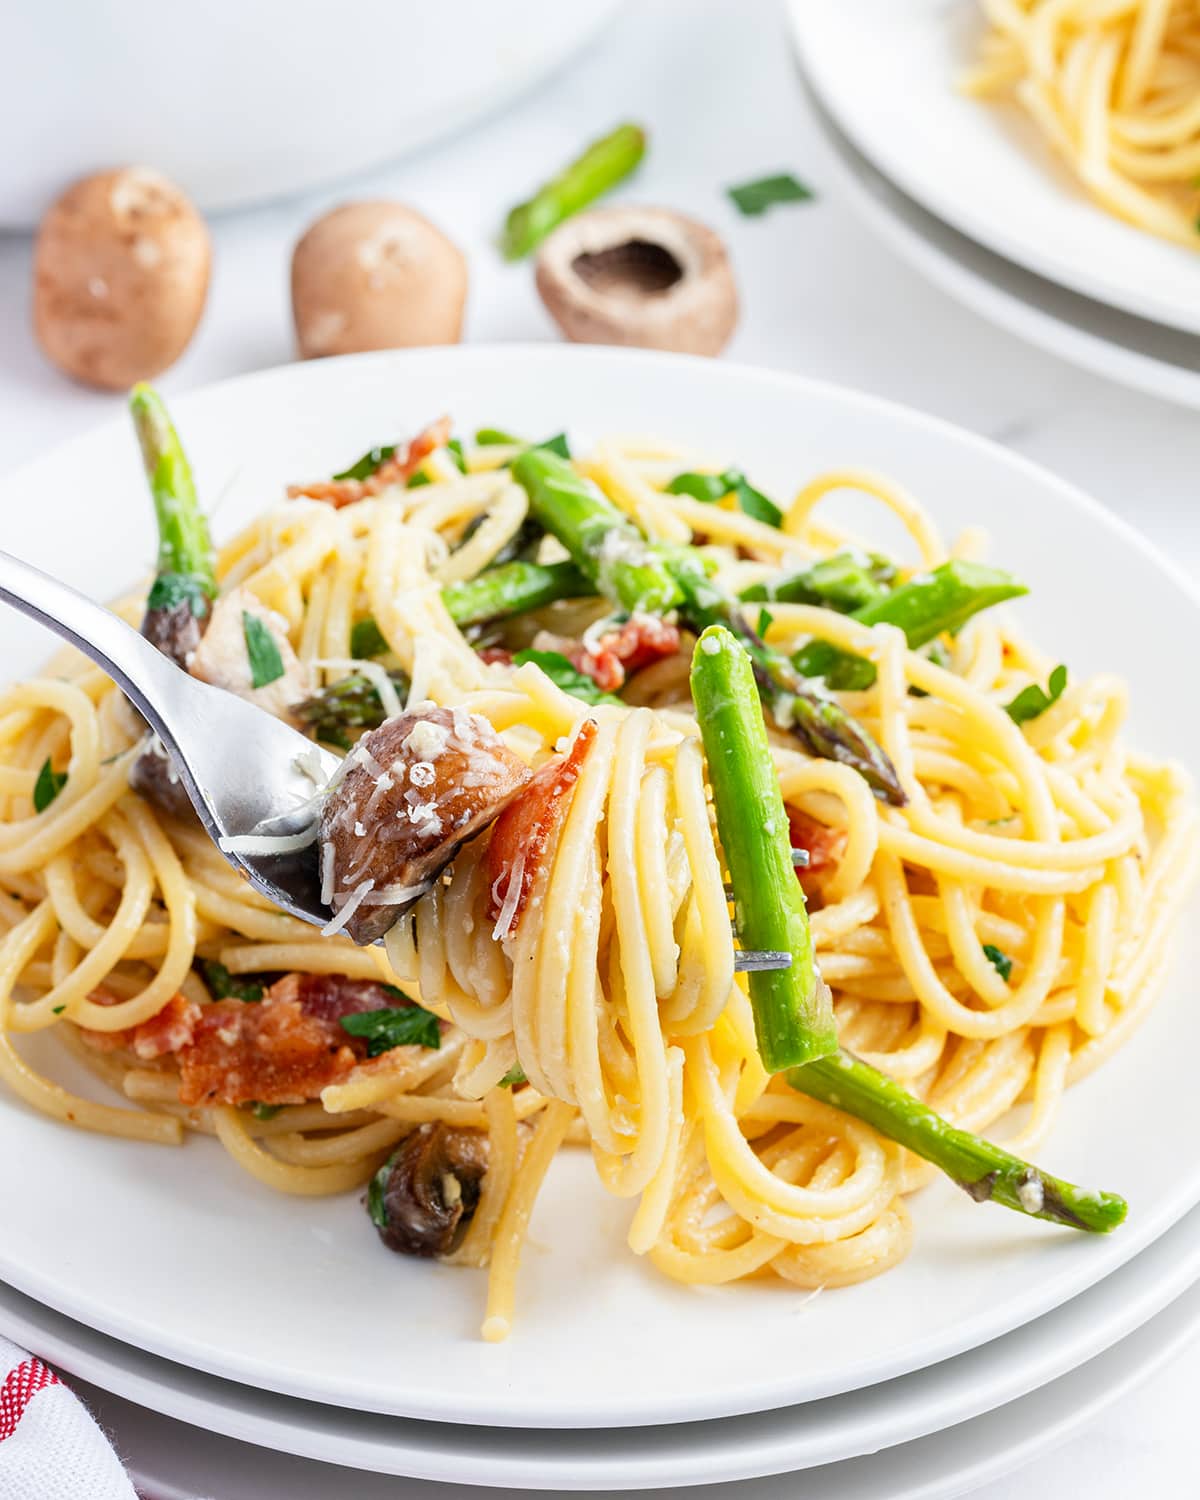 A plateful of asparagus carbonara, with a bite of it on a fork.